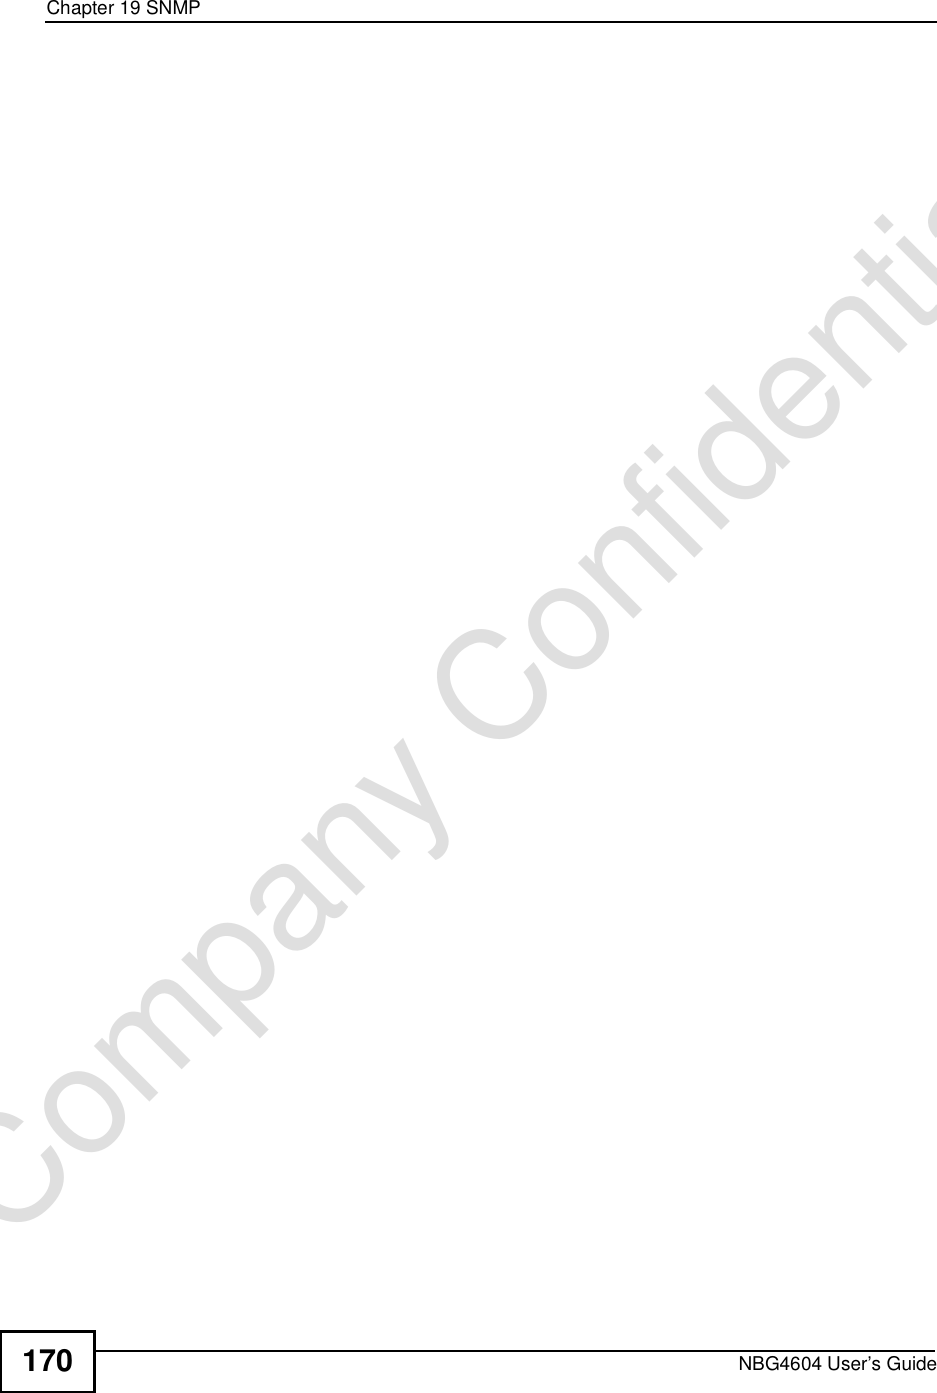 Chapter 19SNMPNBG4604 User’s Guide170Company Confidential